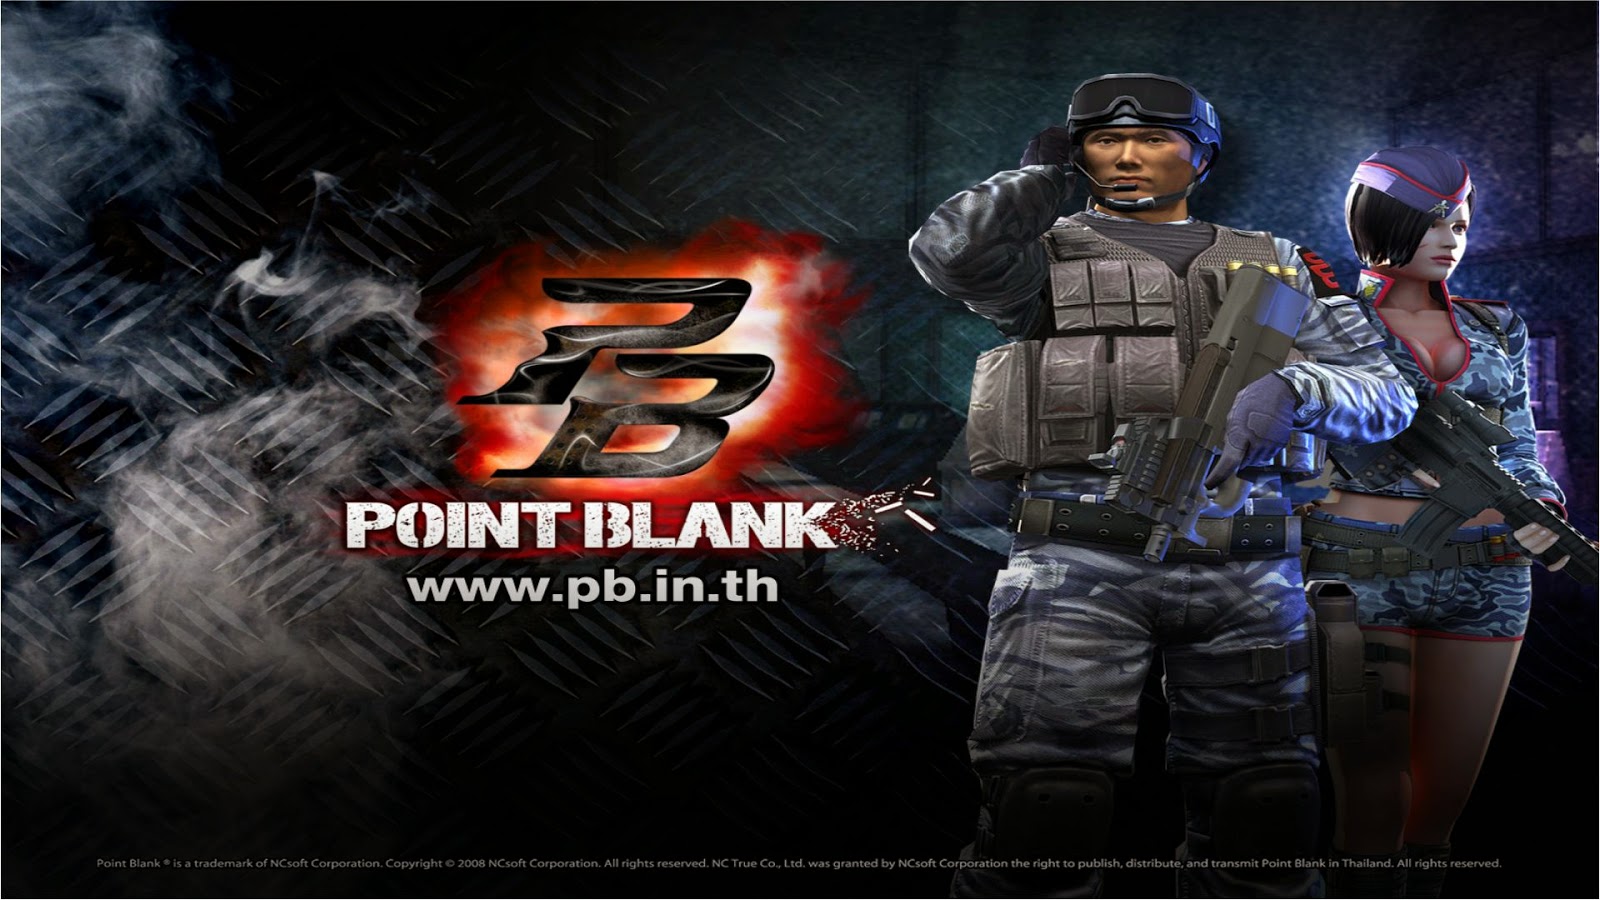 wallpaper point blank keren,action adventure game,shooter game,pc game,movie,soldier